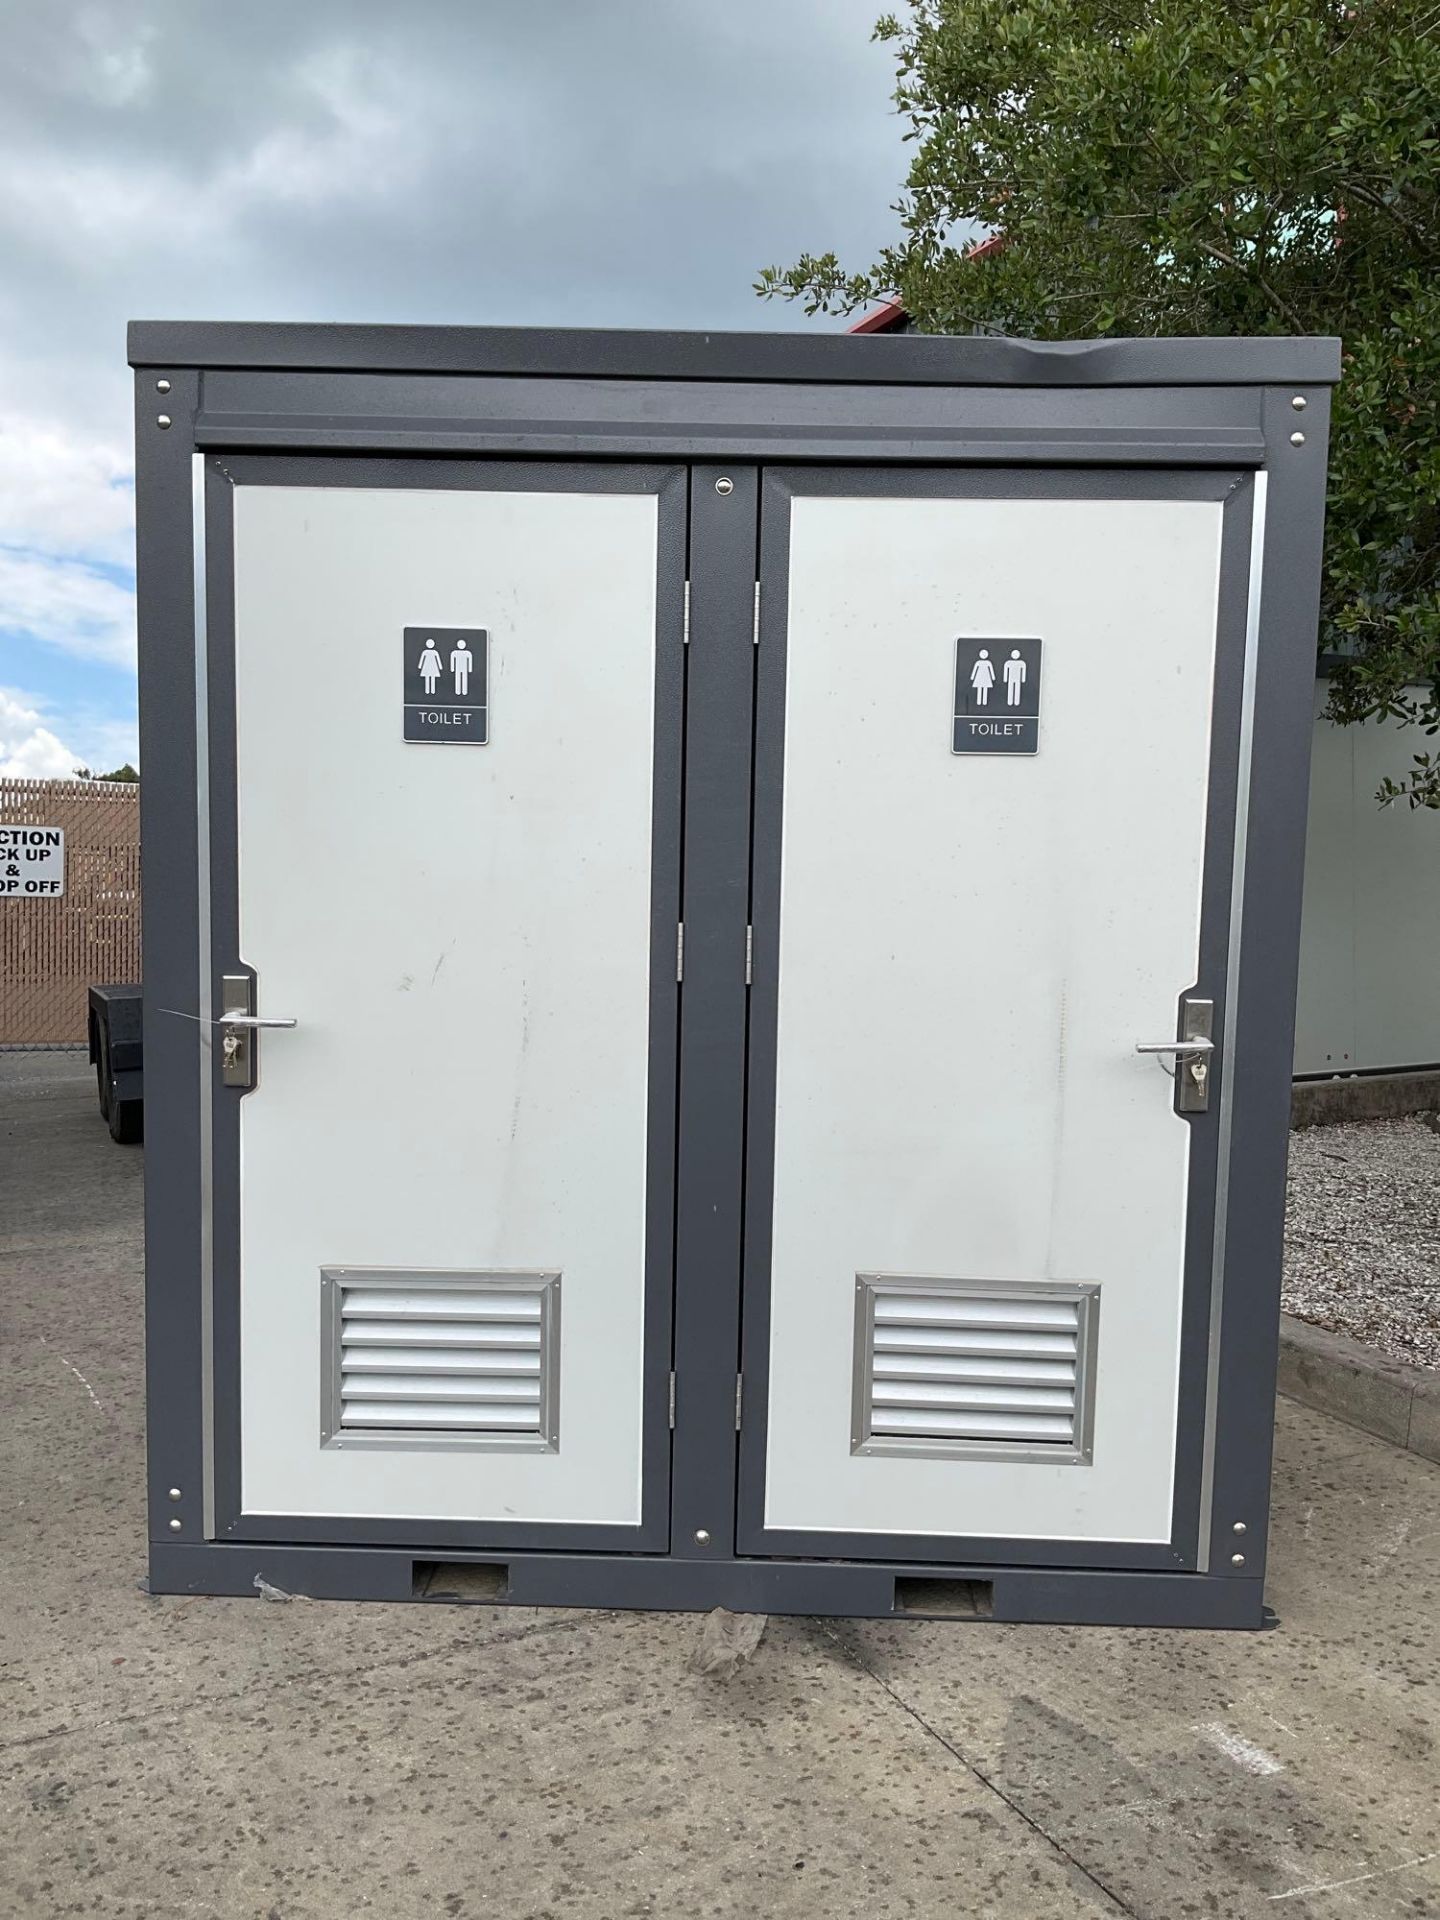 UNUSED PORTABLE DOUBLE BATHROOM UNIT, 2 STALLS, ELECTRIC & PLUMBING HOOK UP WITH EXTERIOR PLUMBING C - Image 8 of 16